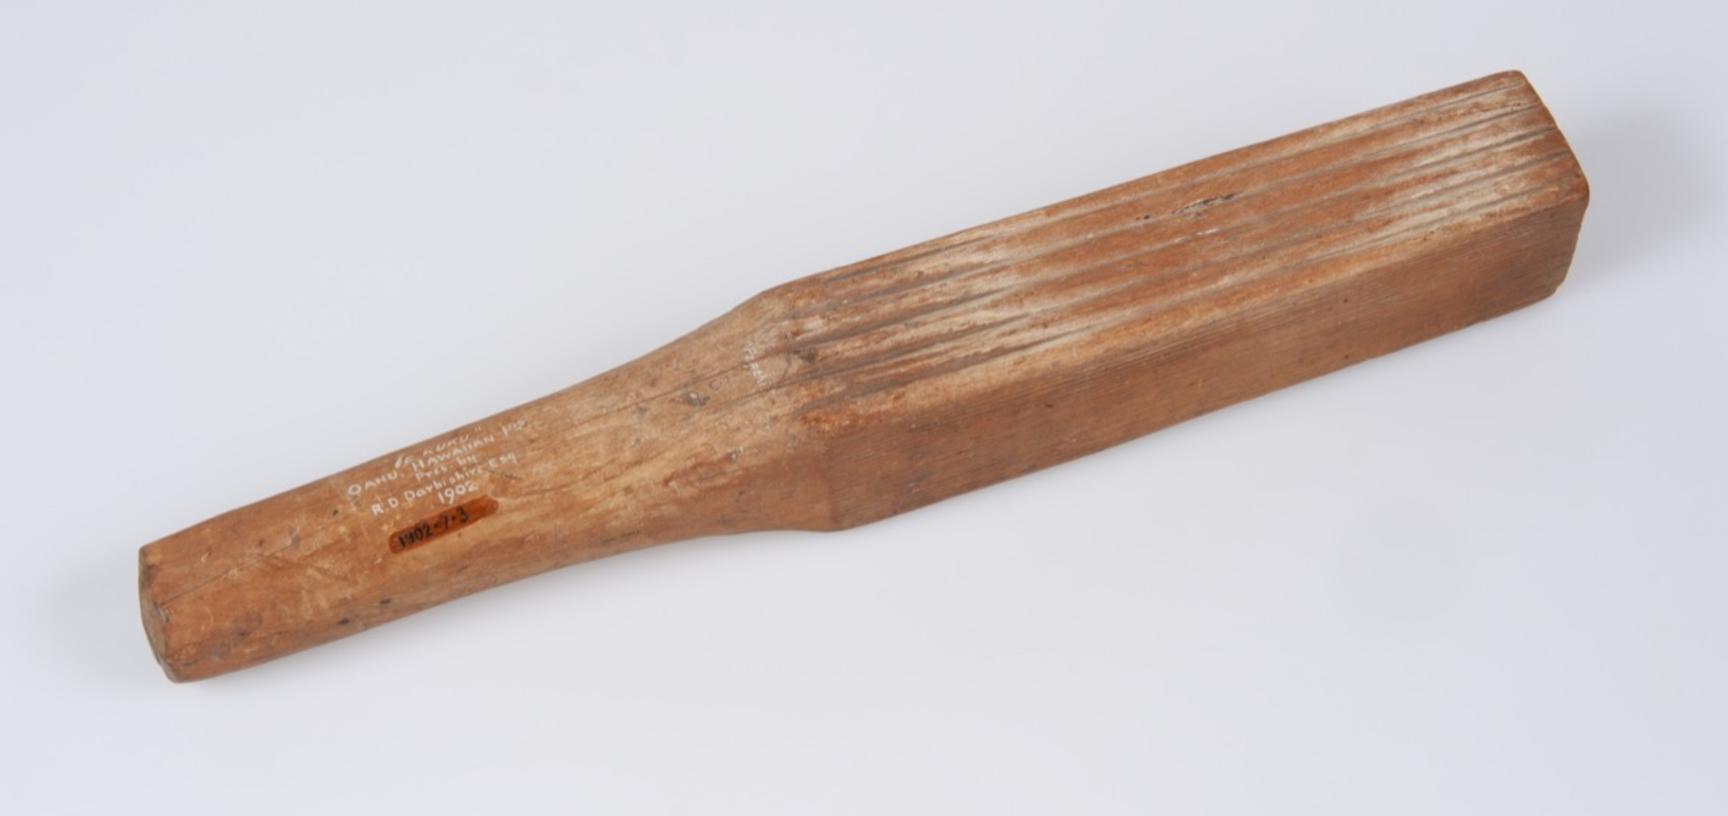 A rectangular block of wood used for beating bark cloth. It has lines engraved at one end and narrows slightly at the other end to form a handle.